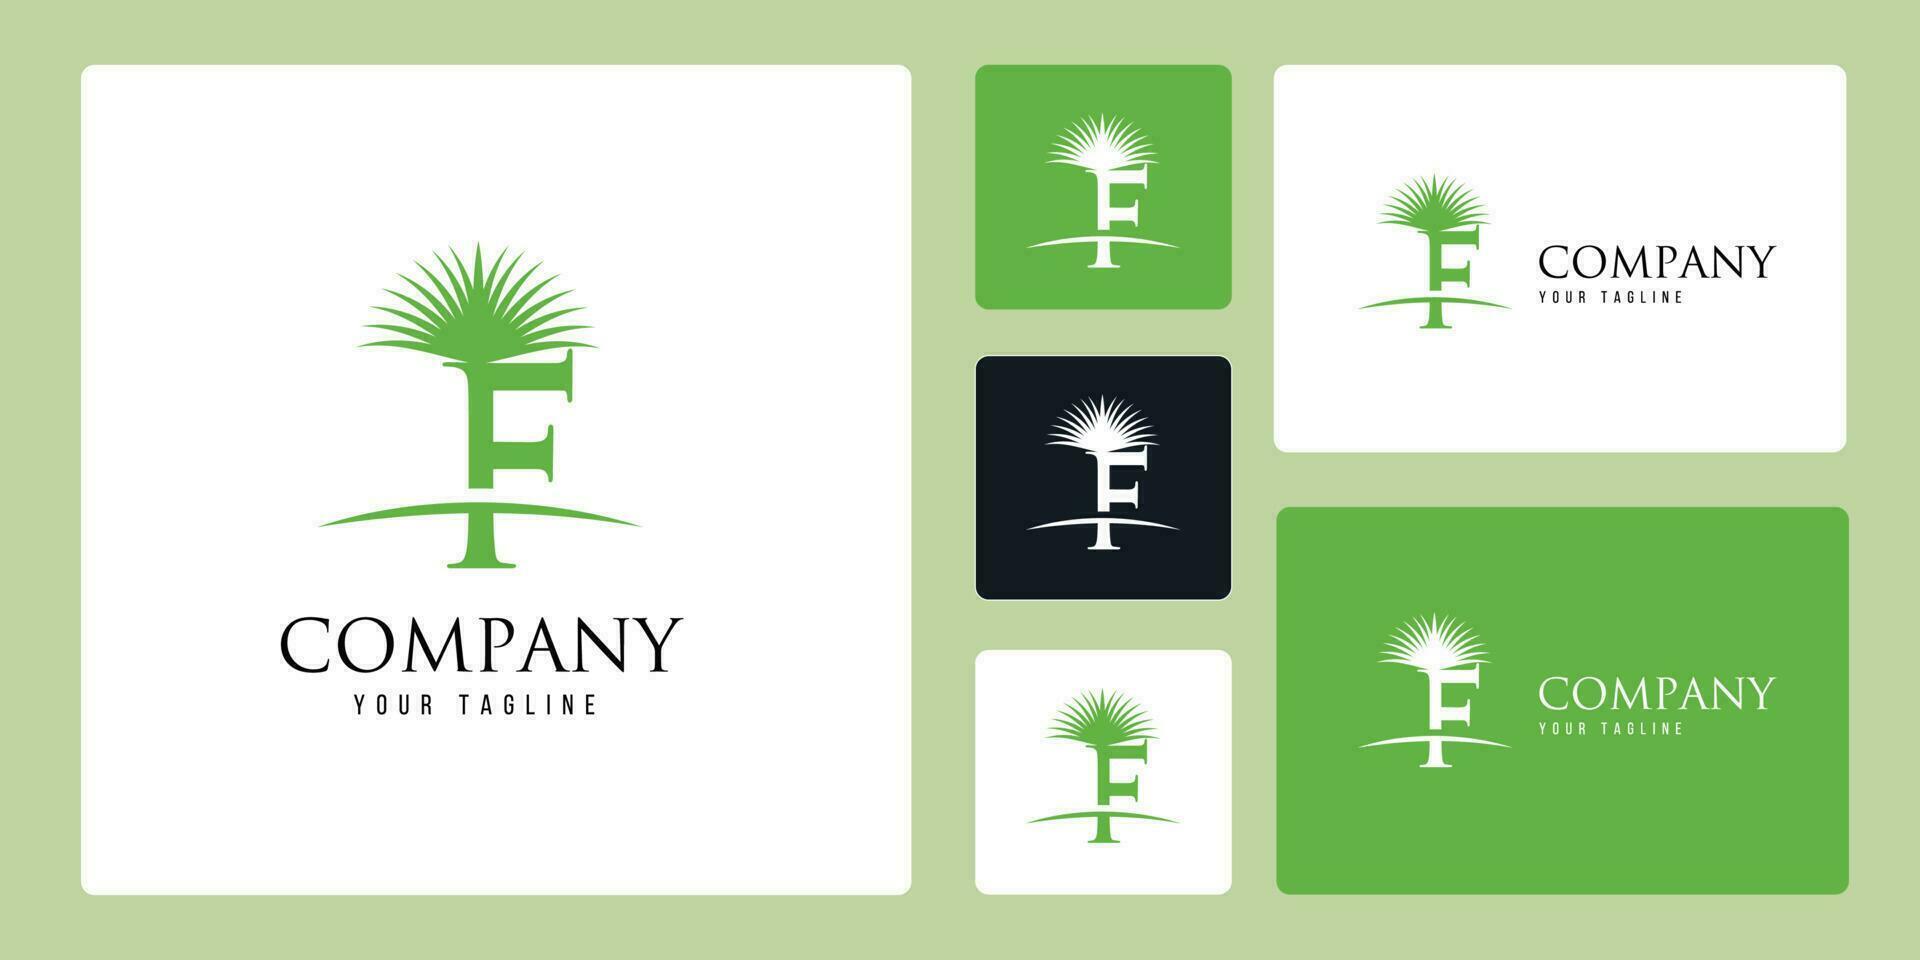 The Logo With The Theme Combination Of Palm Trees And The Letter F With Green Color Symbolizes Coolness. Suitable for use by Companies Engaged in Palm Oil, Lodging, Resorts, Beaches, and Others. vector